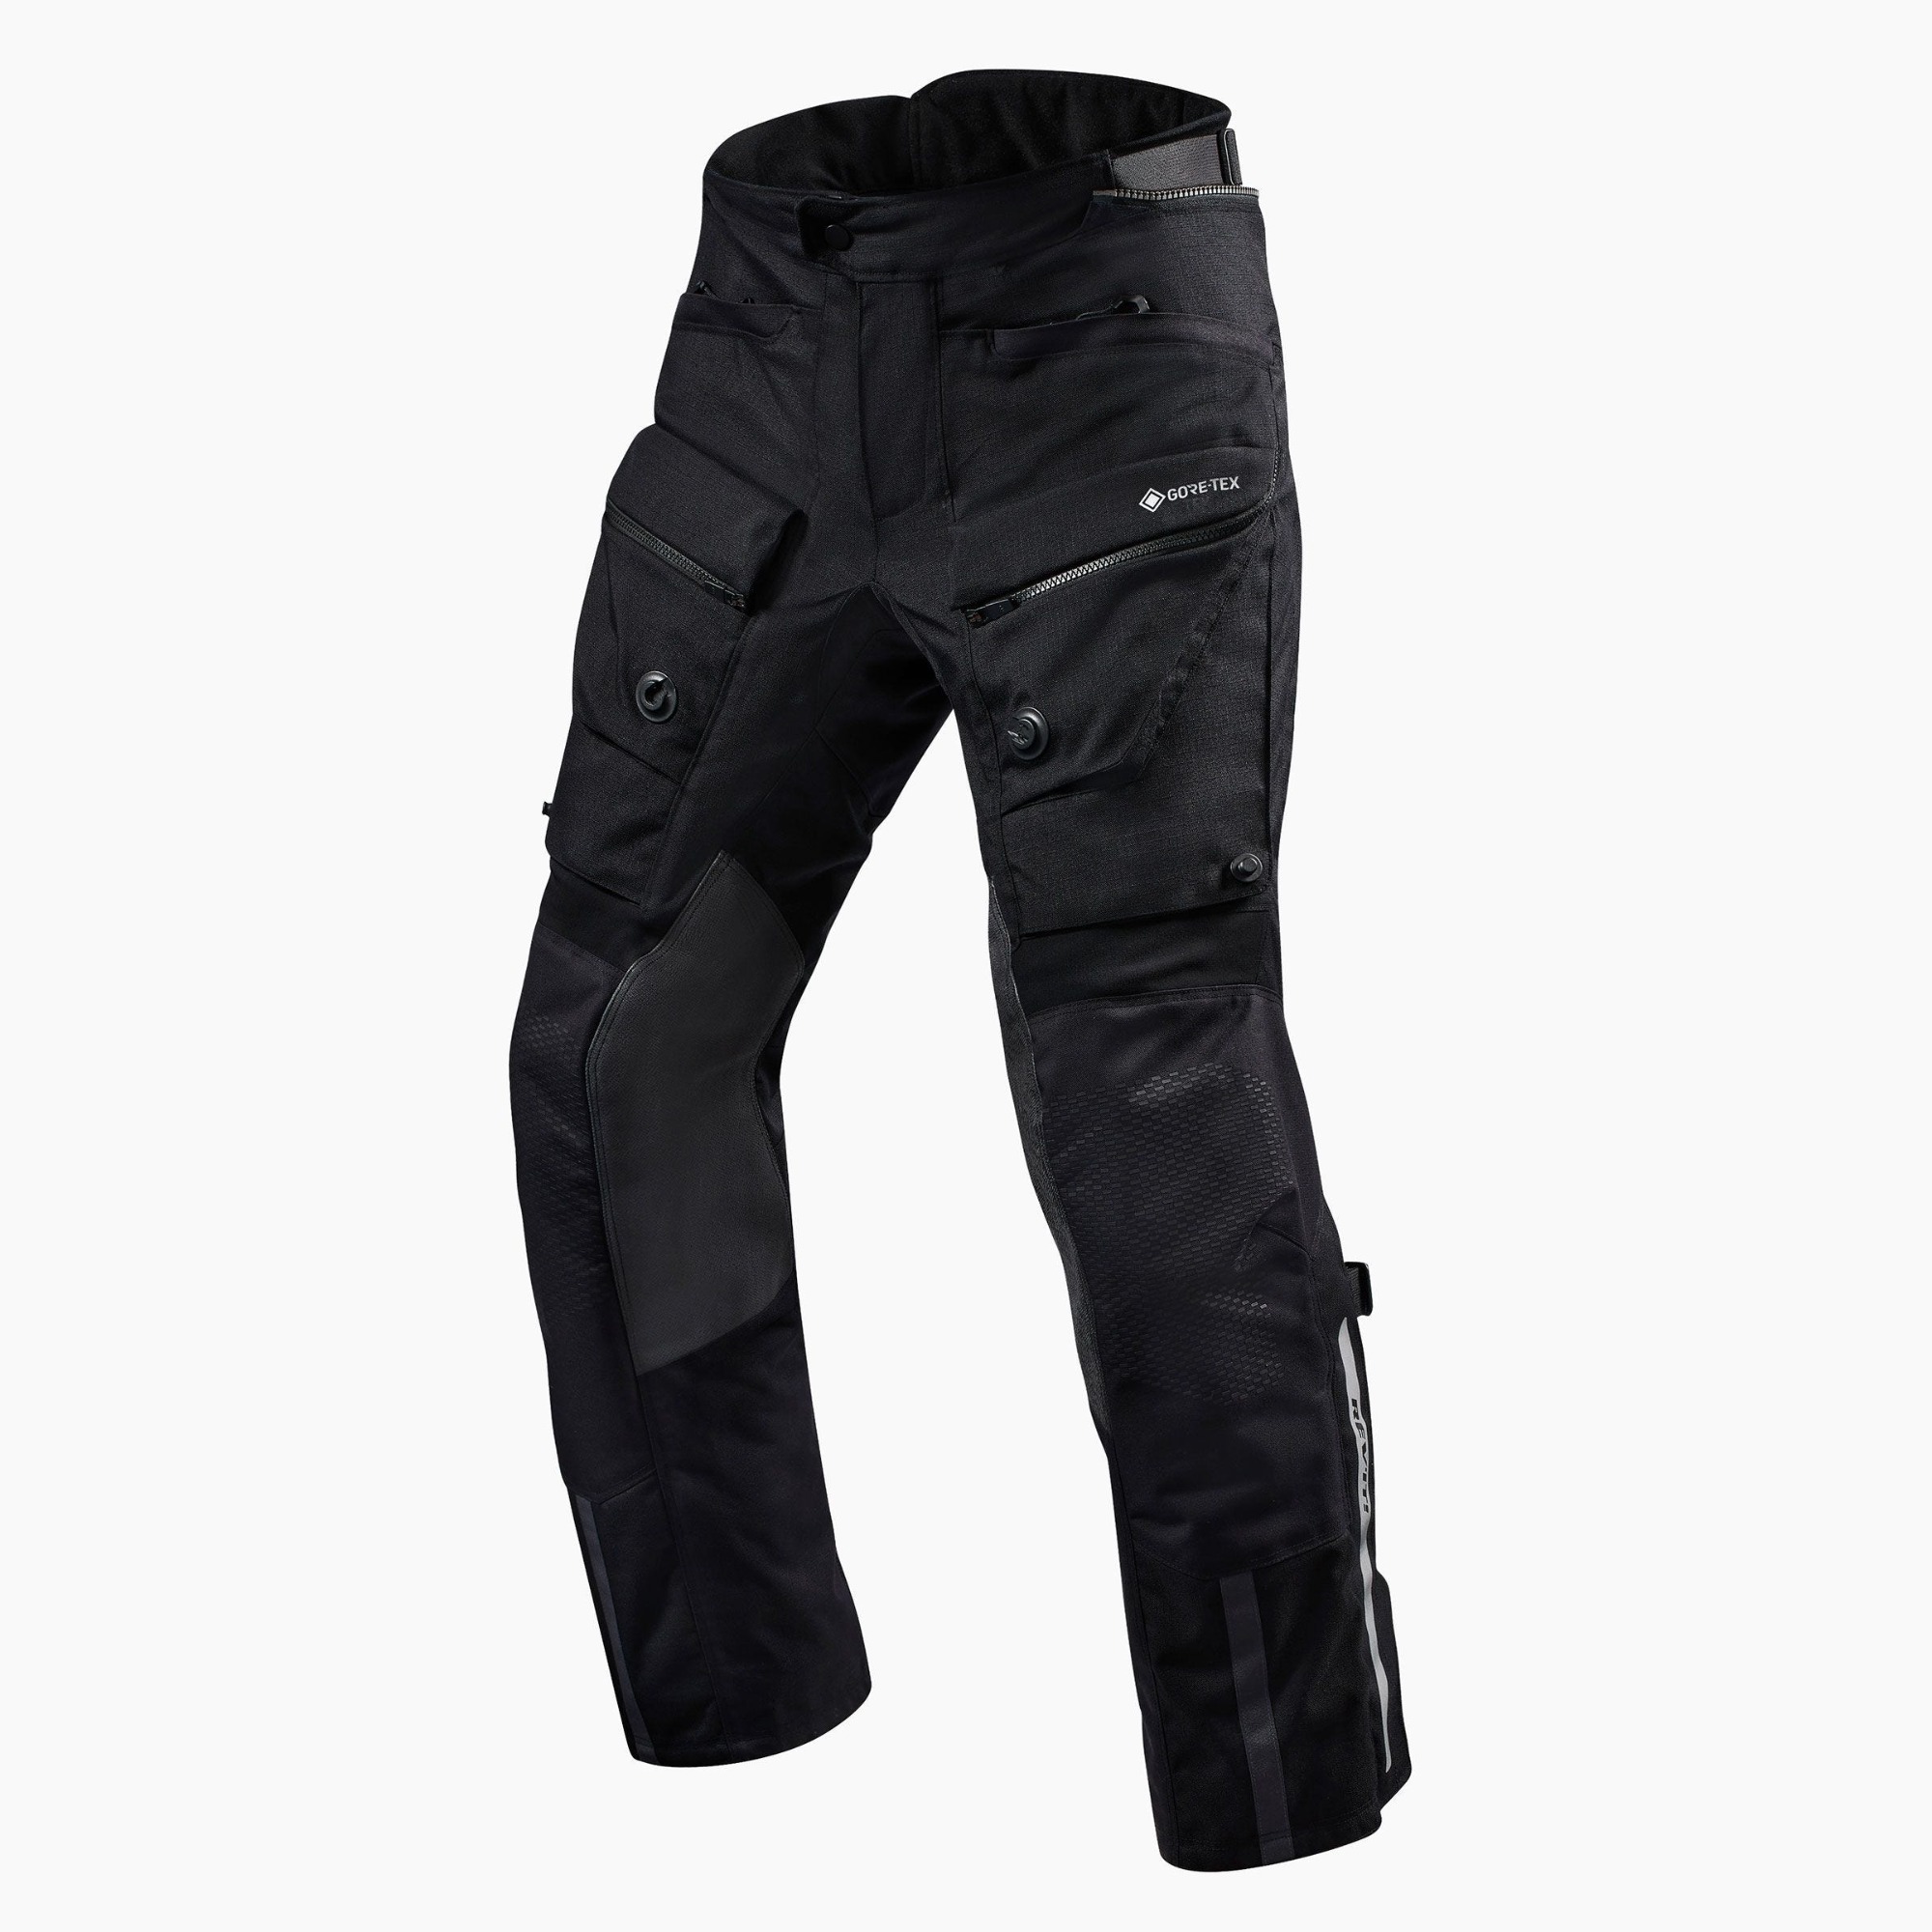 Image of REV'IT! Trousers Defender 3 GTX Black Short Motorcycle Pants Size 2XL ID 8700001319881